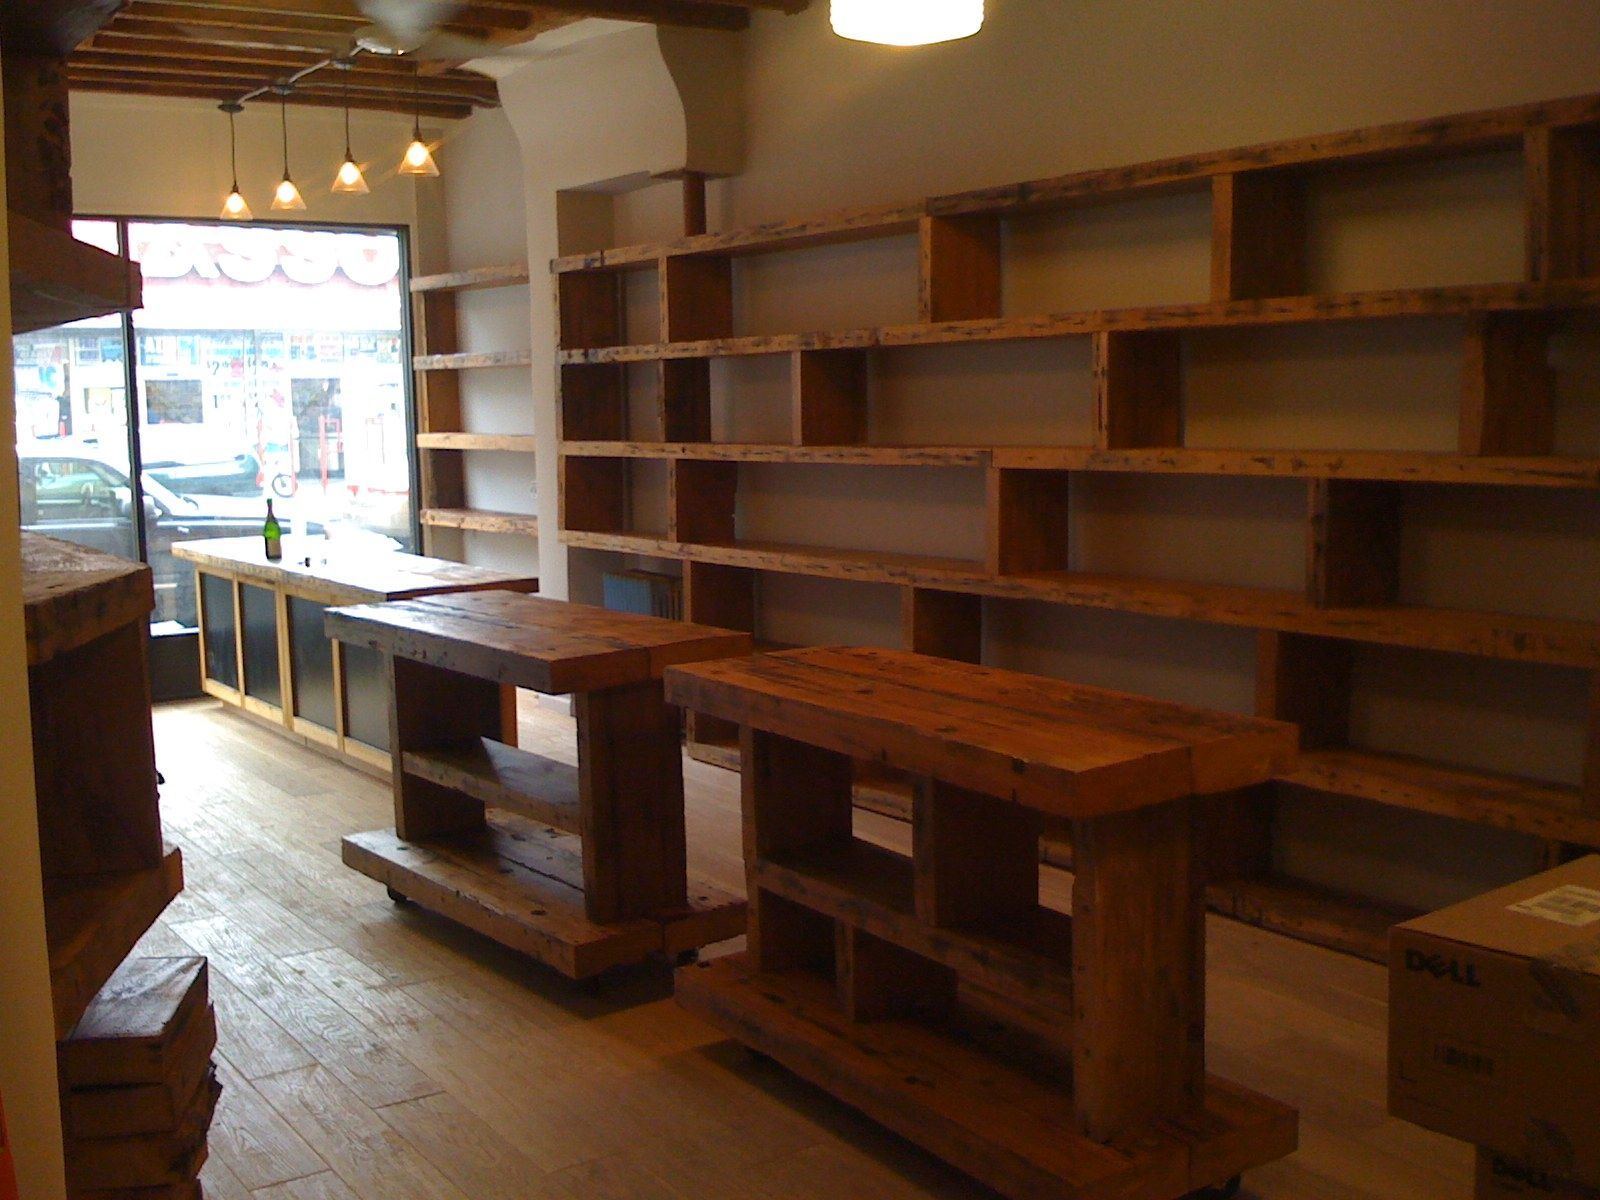 Wood shelving up the wall/pos counter reclaimed wood top -   19 shop fitness ideas